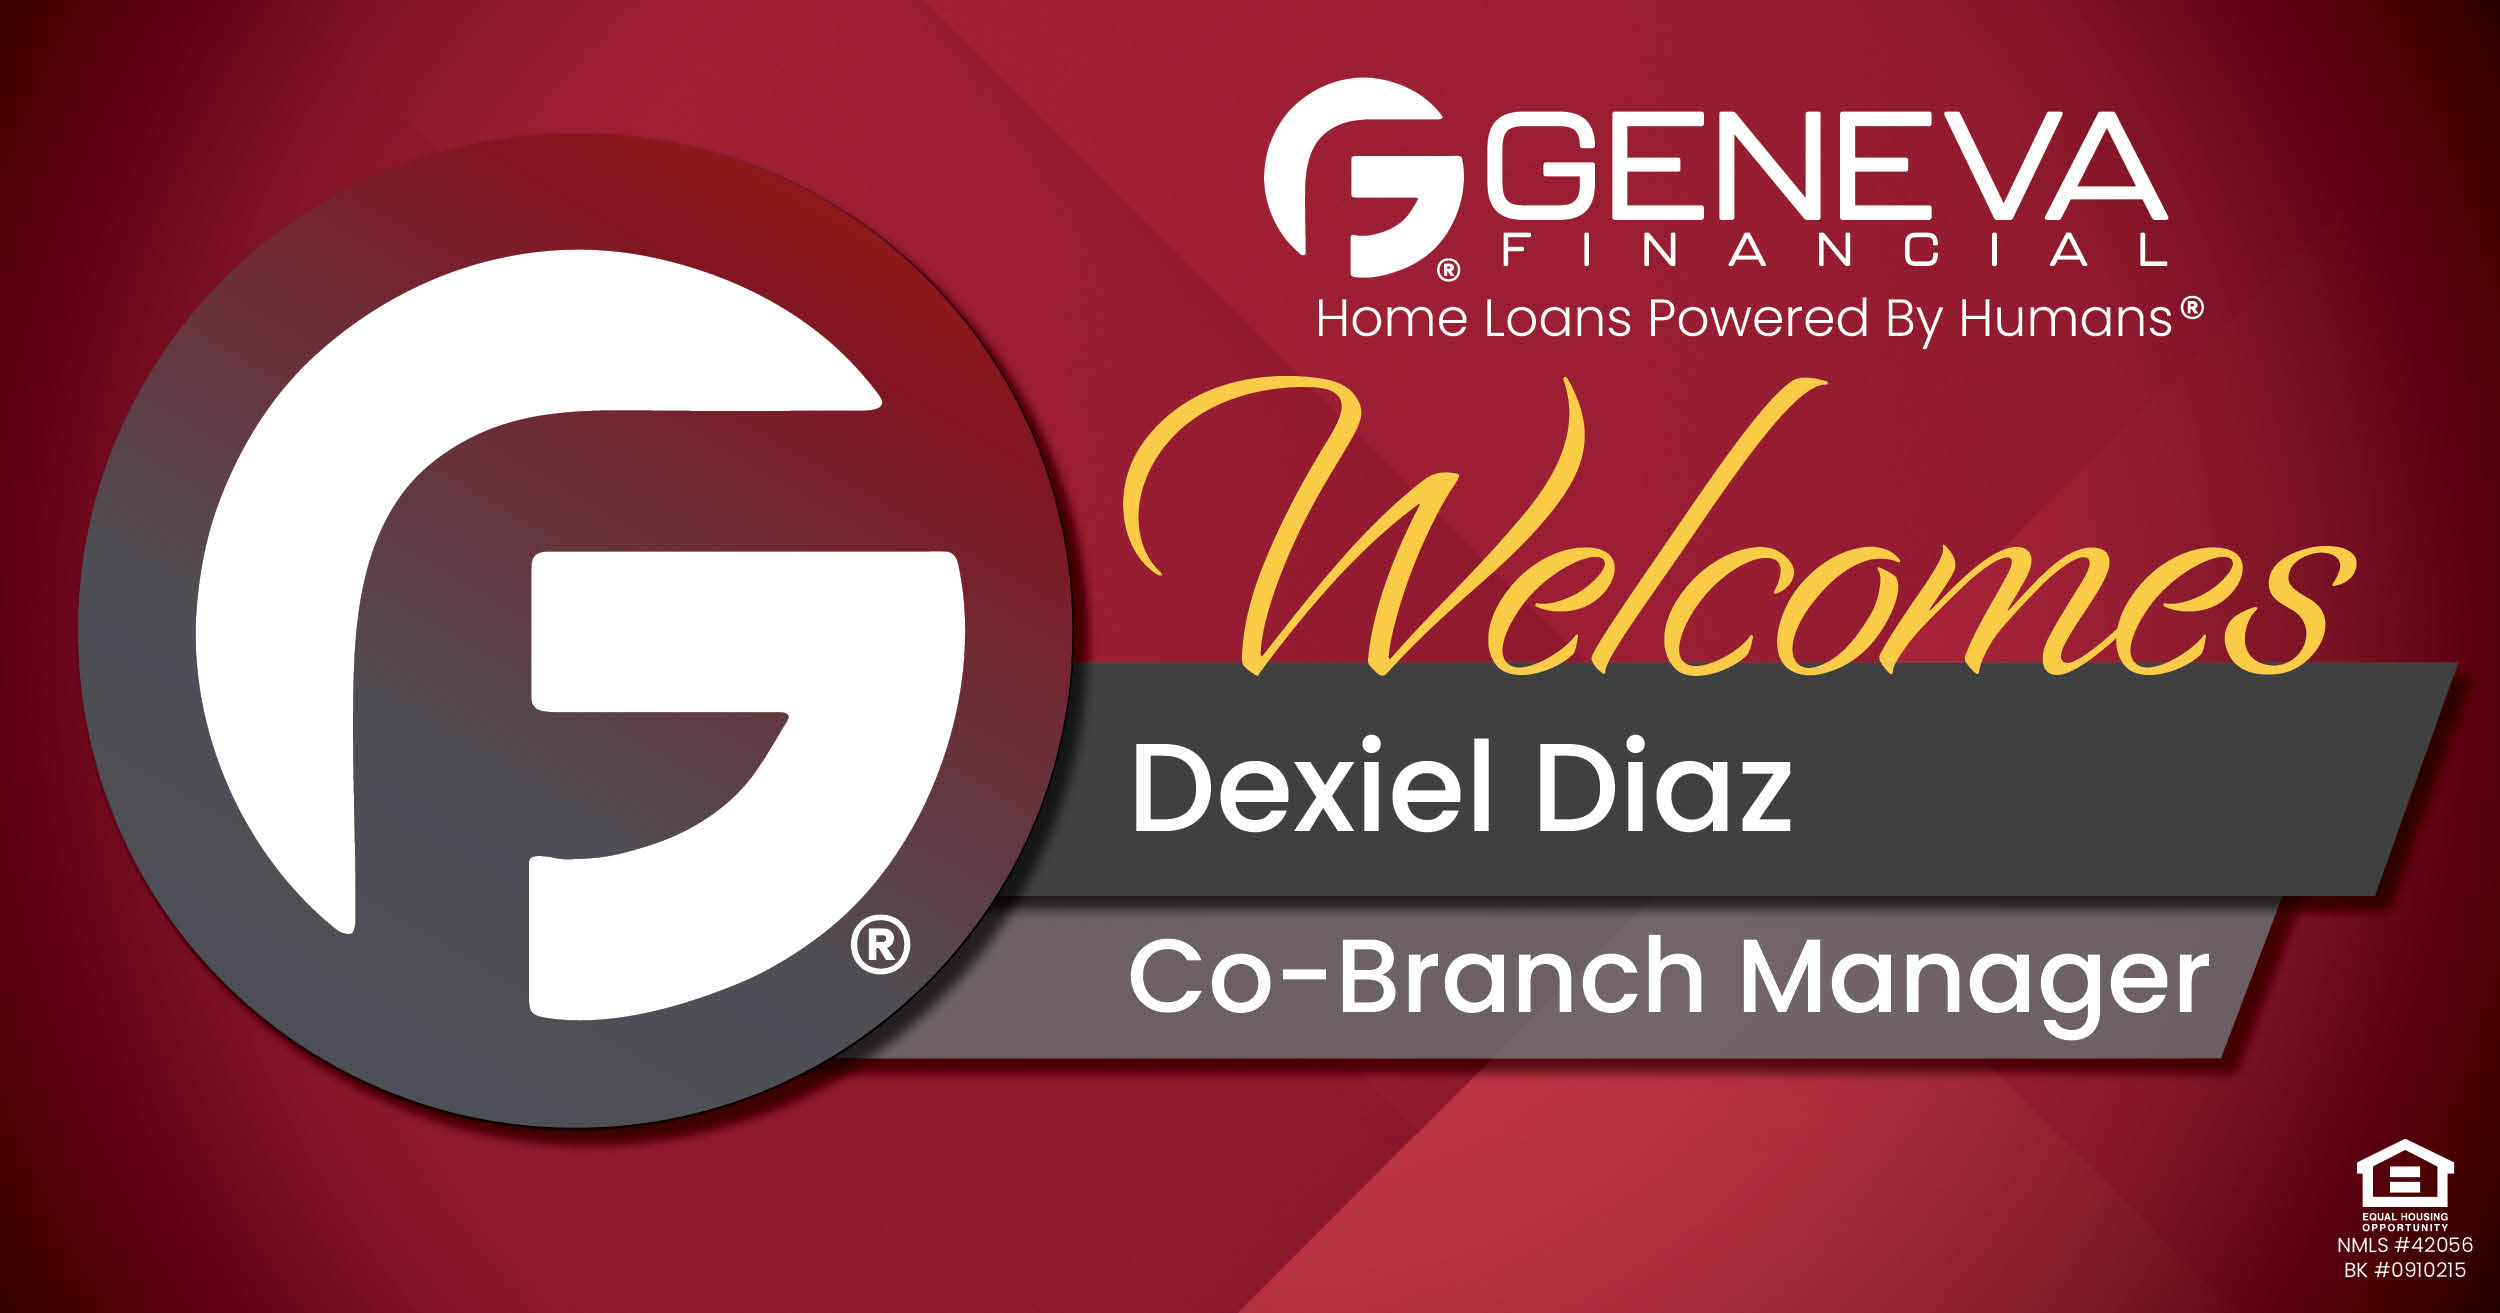 Geneva Financial Welcomes New Co-Branch Manager Dexiel Diaz to Miami, FL – Home Loans Powered by Humans®.